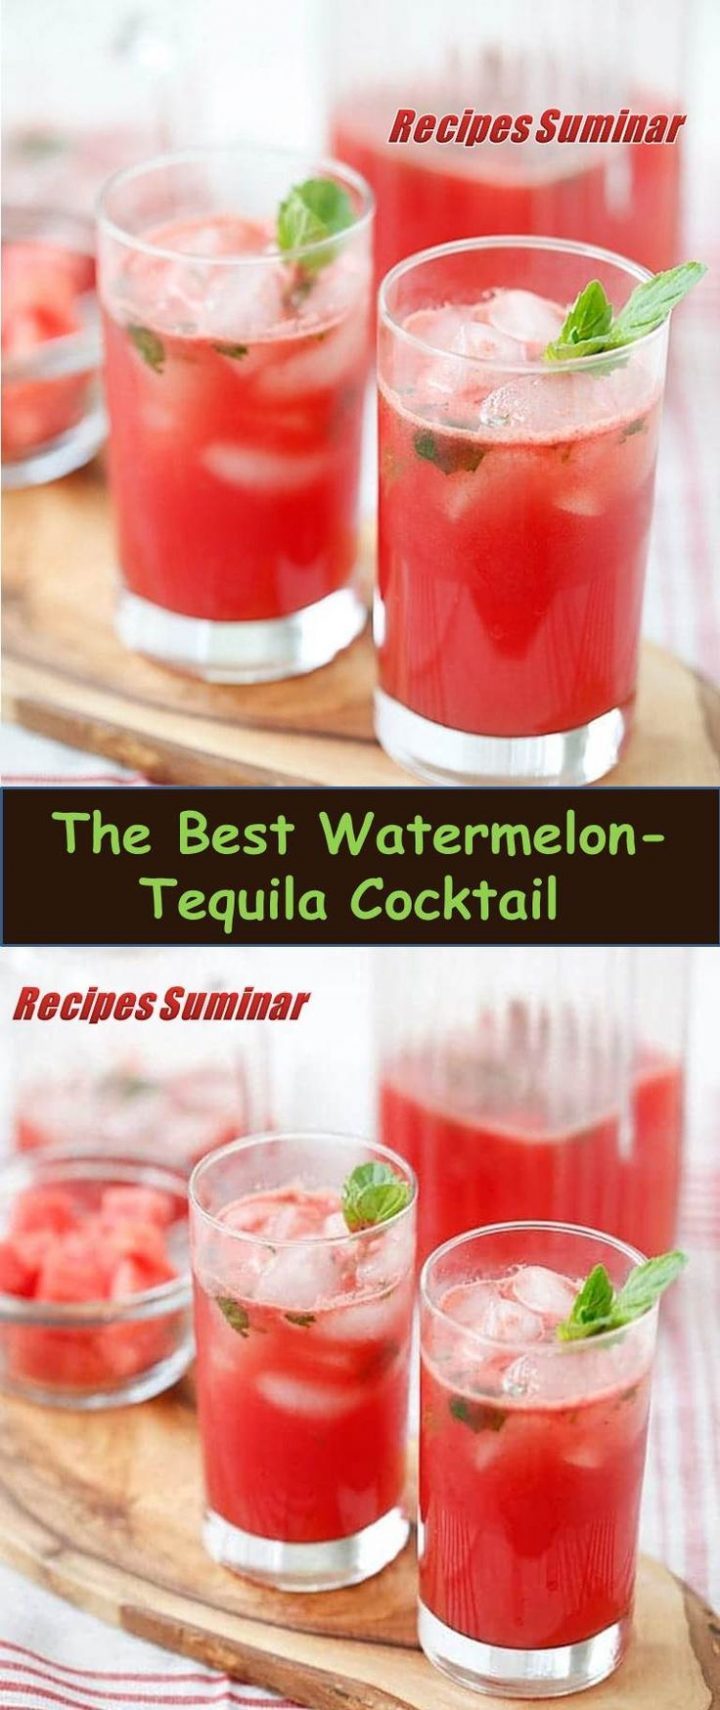 ★★★★★ 877 Comments Recipe Suminar ==> Watermelon and tequila cocktail Recipe # Watermelon and tequila # Cocktail # Recipe Watermelon and tequila cocktail: refreshing and surprising cocktail recipe with fresh watermelon, tequila, lime juice and mint, It takes 15 minutes.